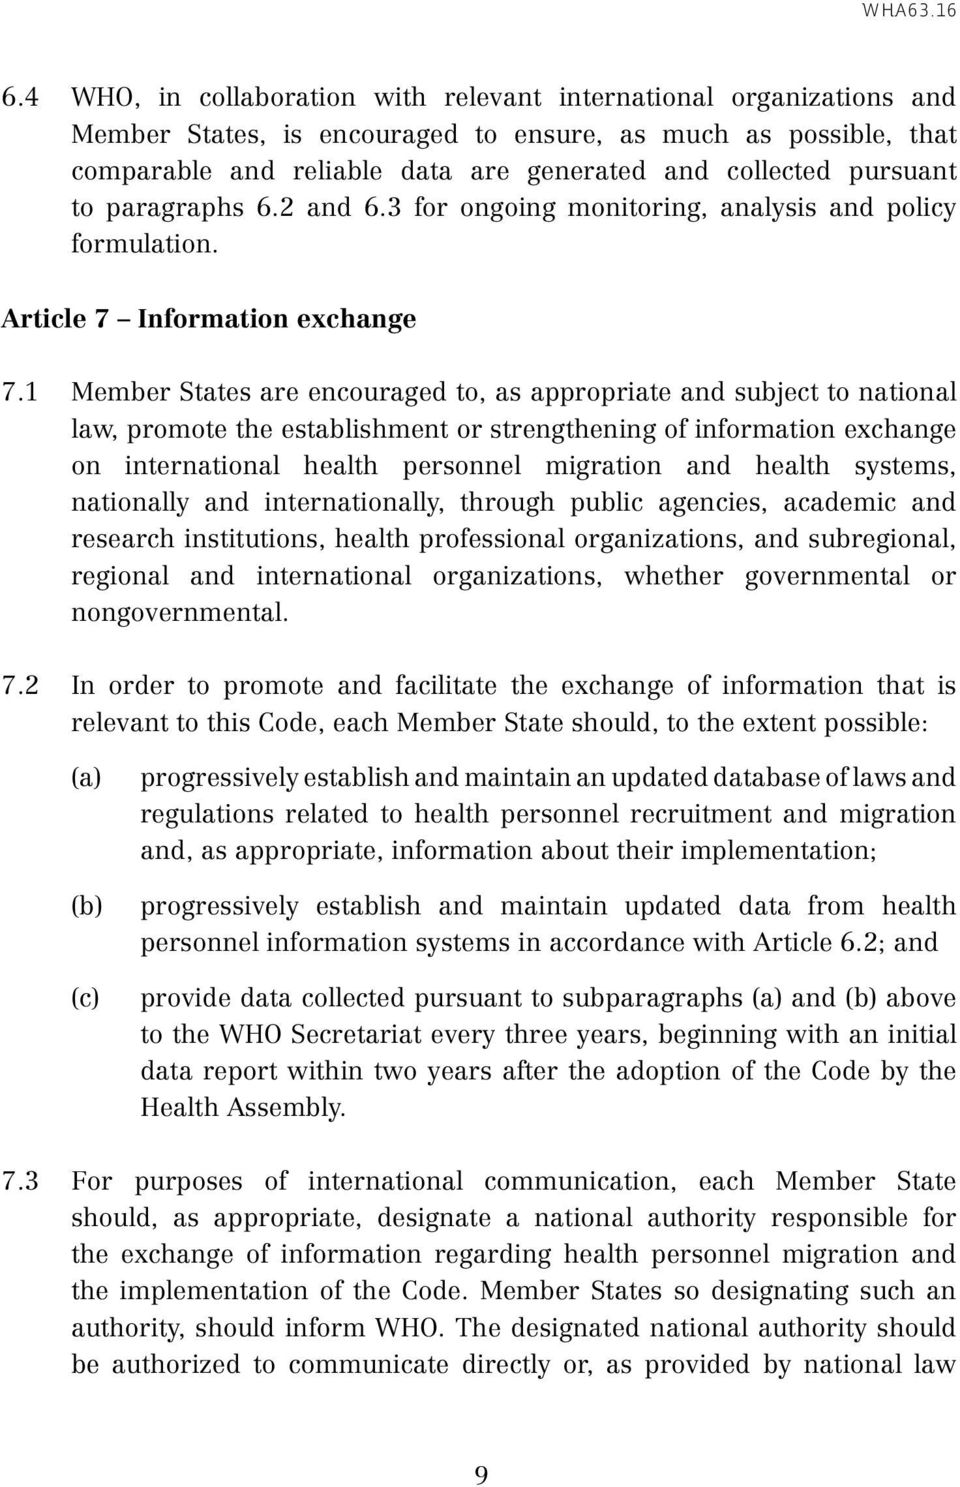 1 Member States are encouraged to, as appropriate and subject to national law, promote the establishment or strengthening of information exchange on international health personnel migration and